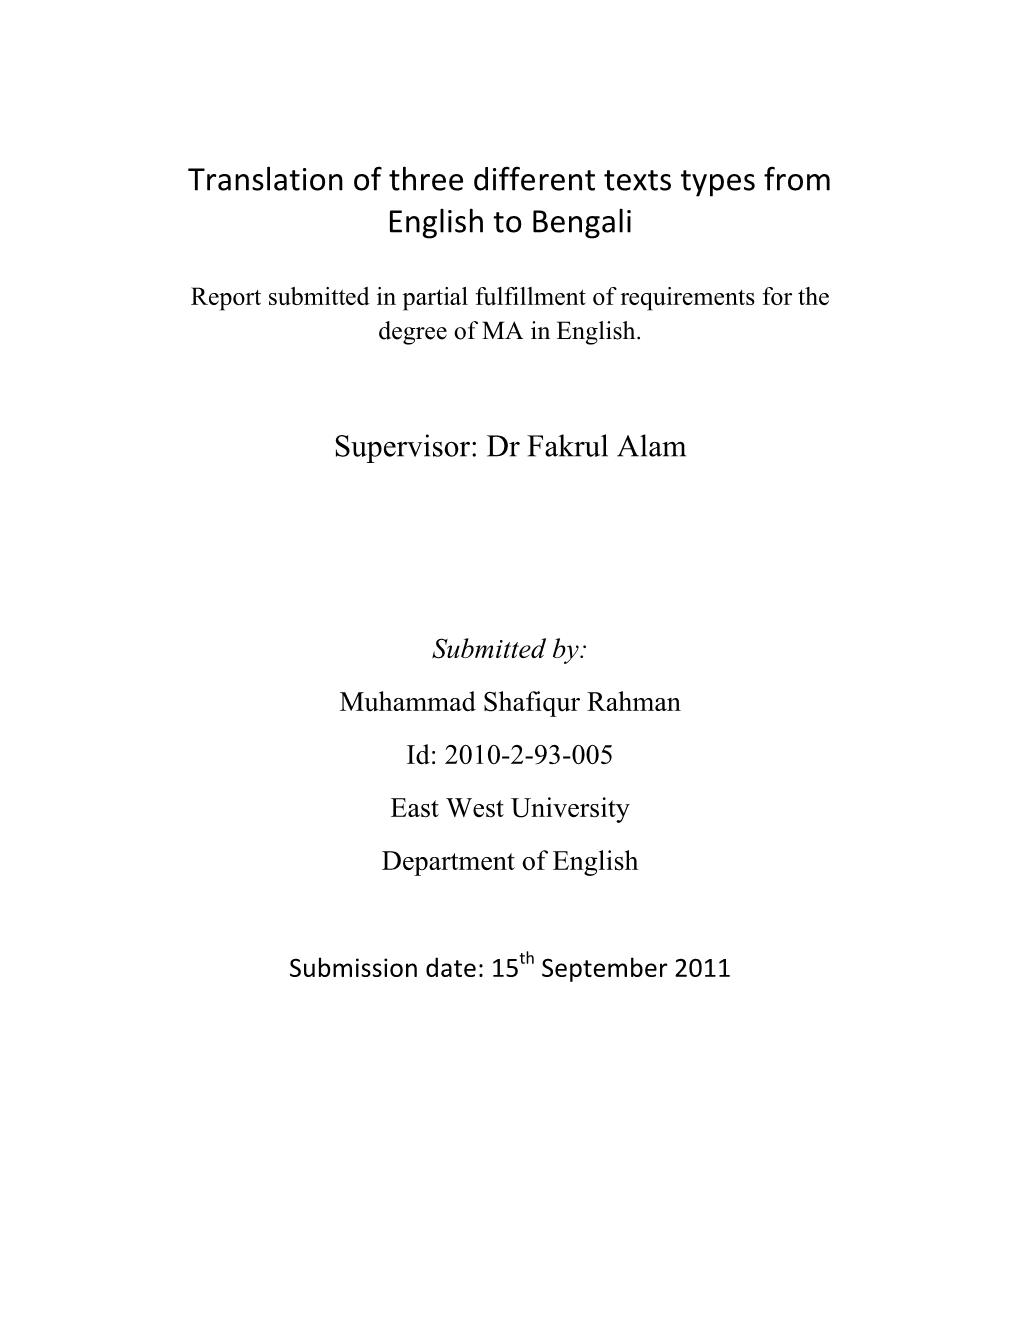 Translation of Three Different Texts Types from English to Bengali